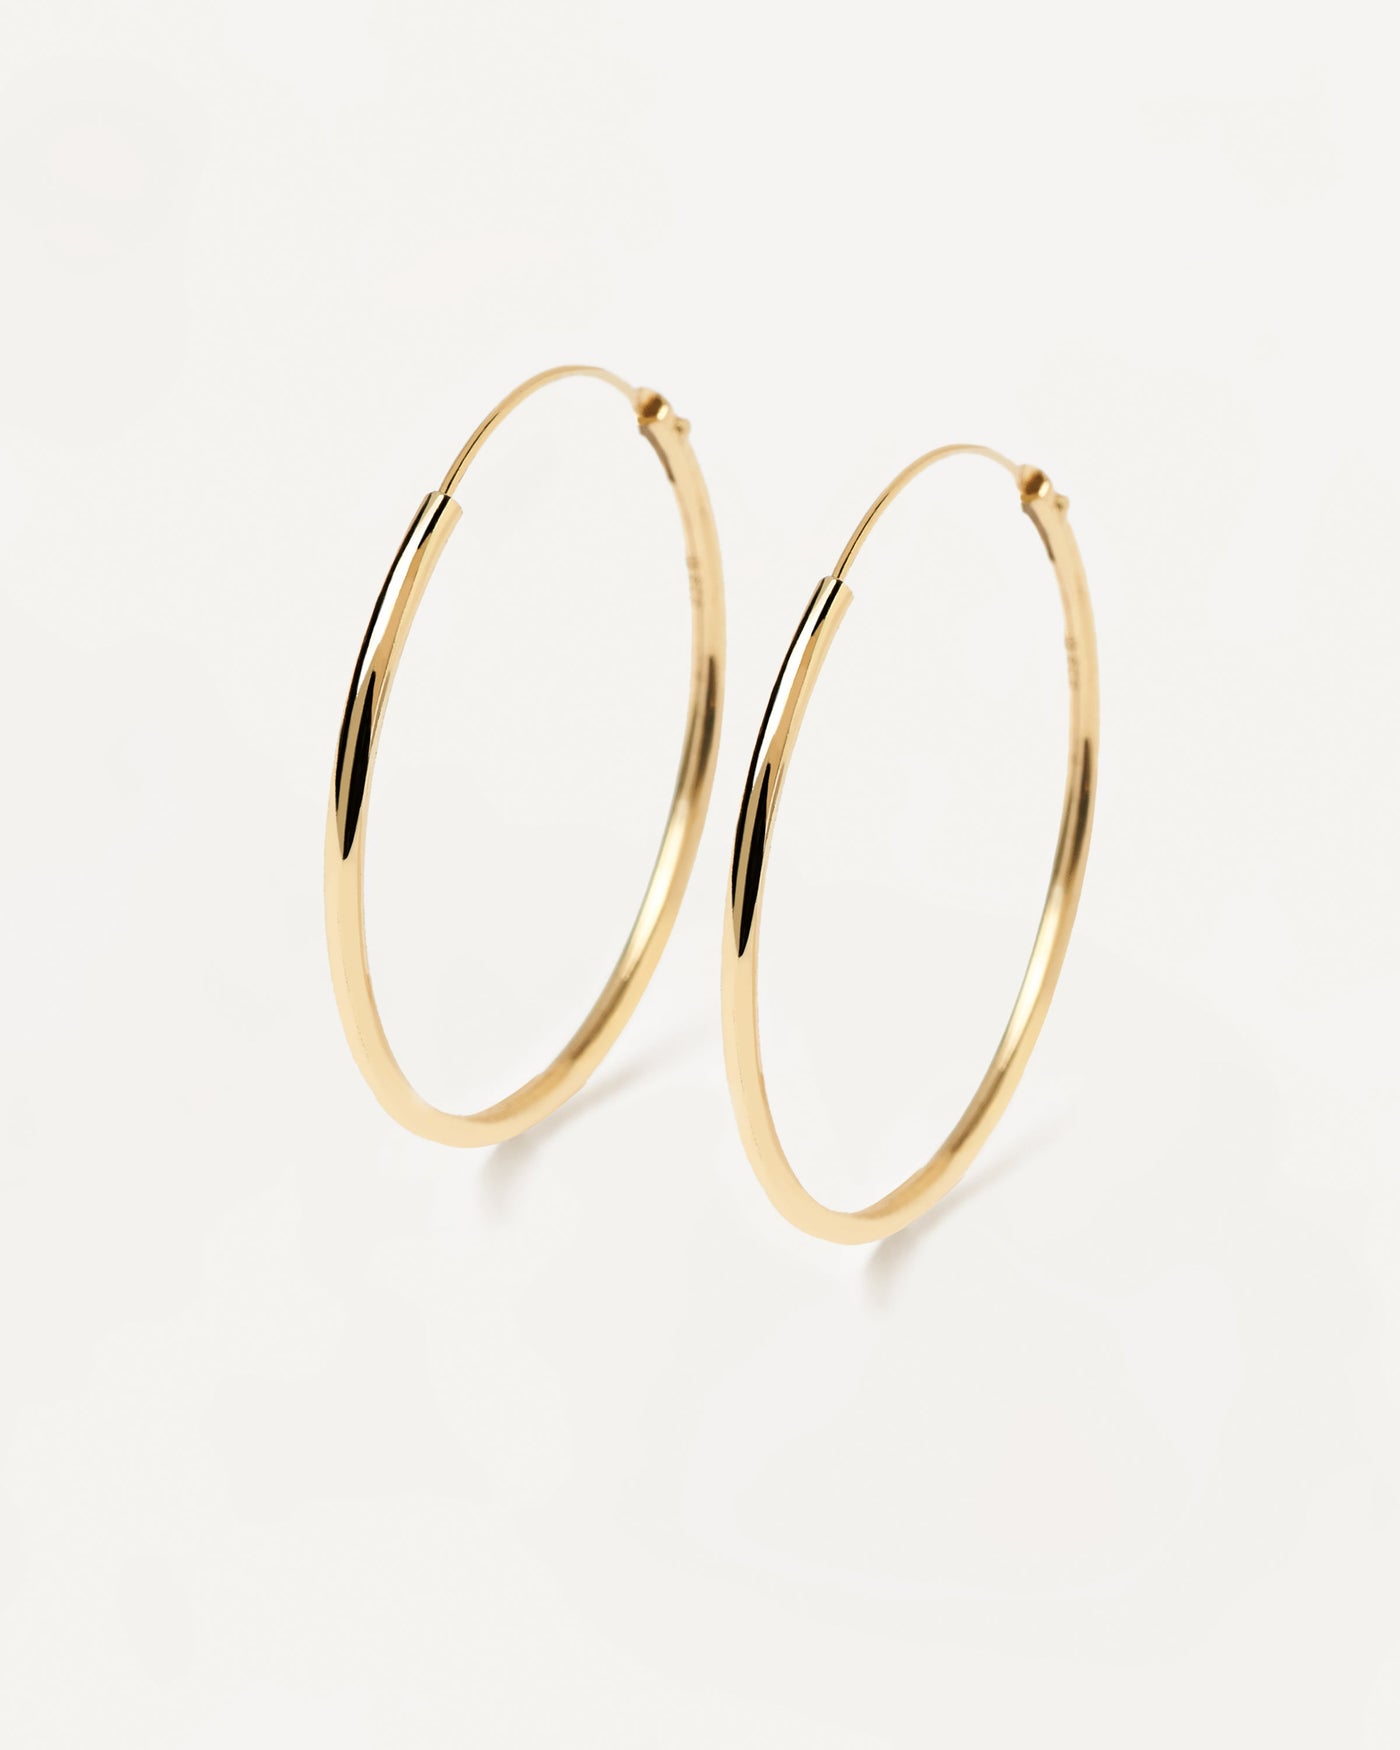 2023 Selection | Large Hoops. Classic round endless hoop earrings in 18k gold plated silver. Get the latest arrival from PDPAOLA. Place your order safely and get this Best Seller. Free Shipping.